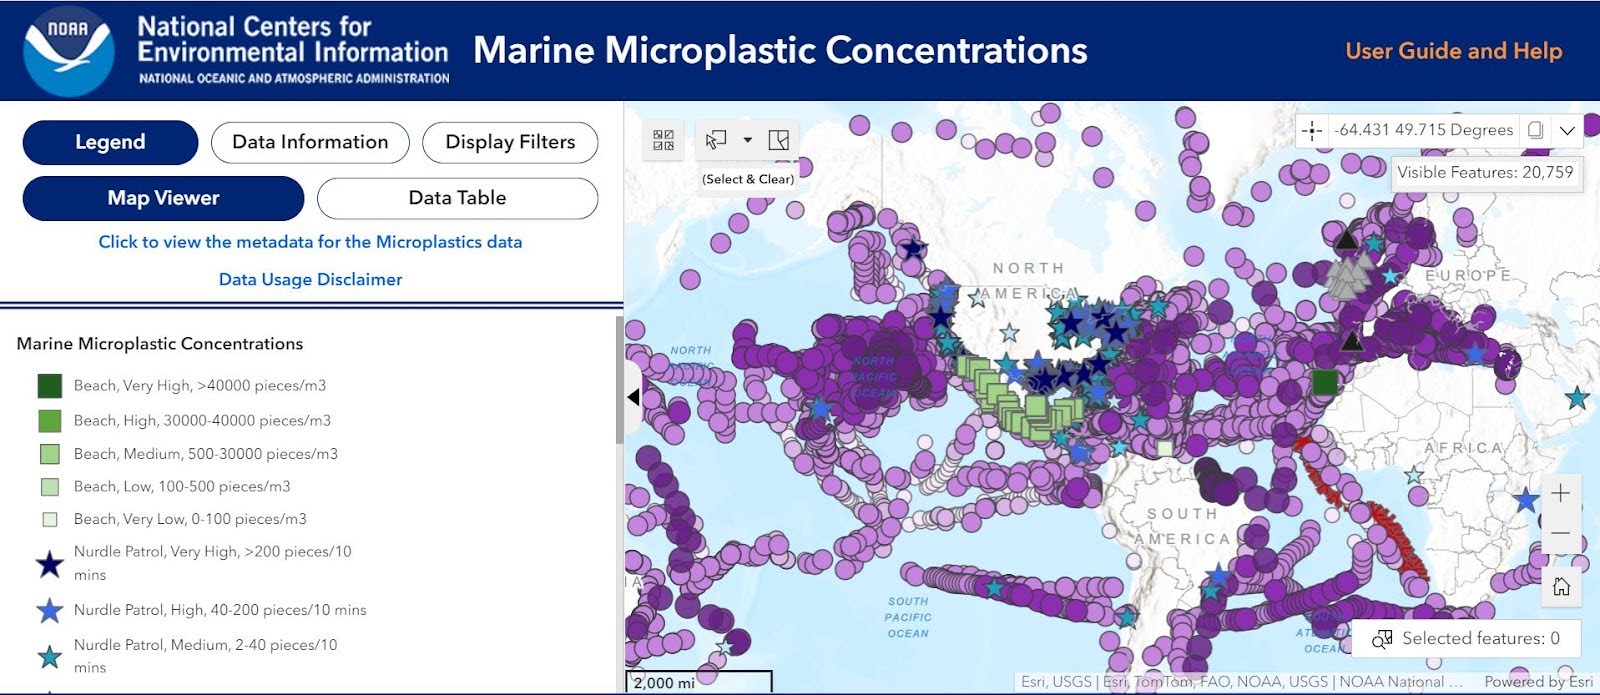 The Marine Microplastics Database map highlights the global distribution of data submitted from contributors around the globe.